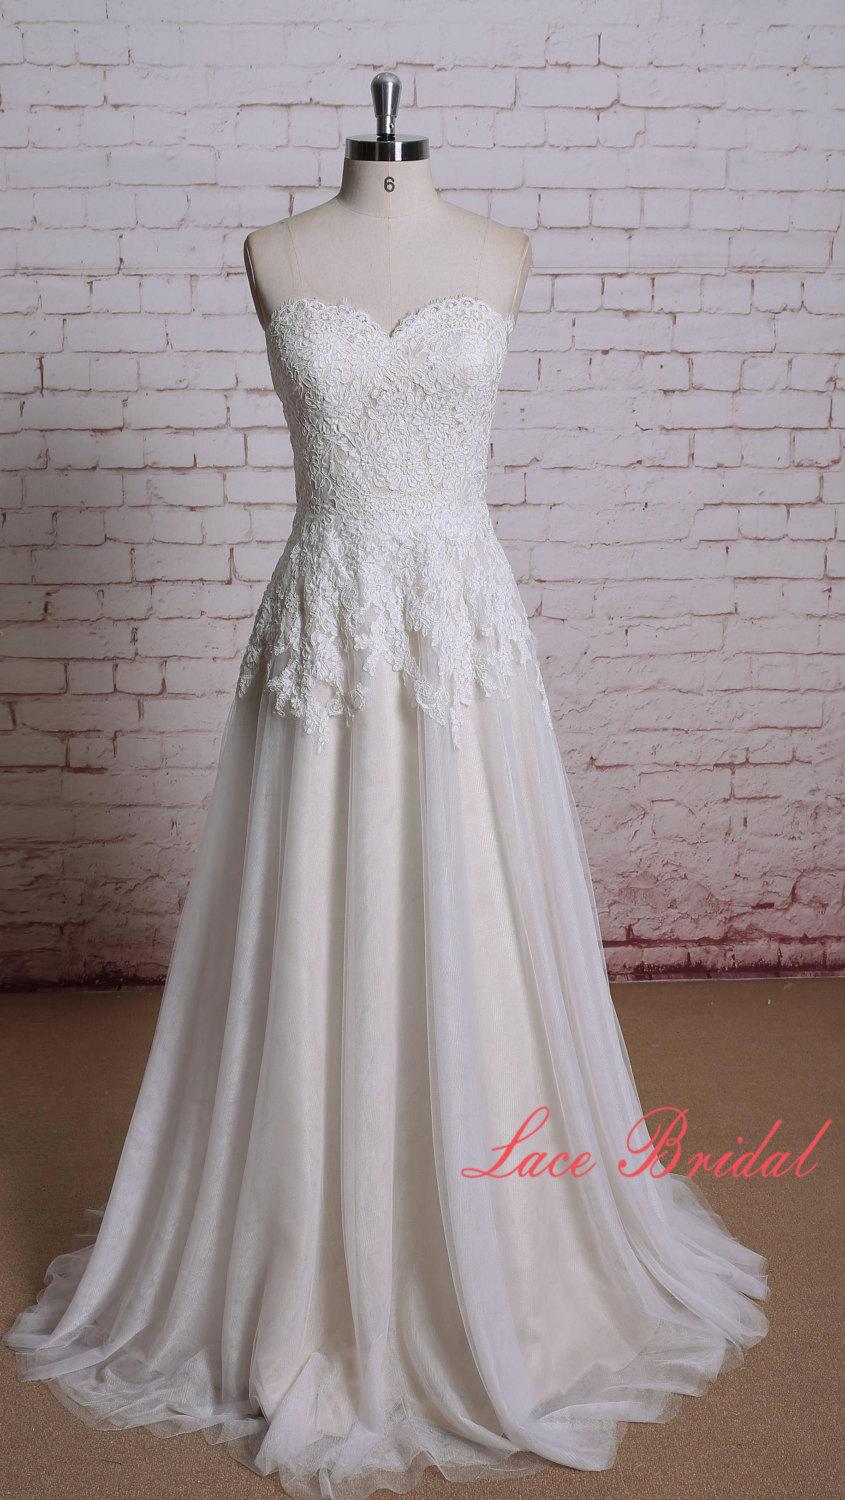 Wedding - Wedding dress of Sweetheart Neckline Ivory Color Lace with Champange underlay Bridal Gown A-line Wedding Dress with Sweep Train